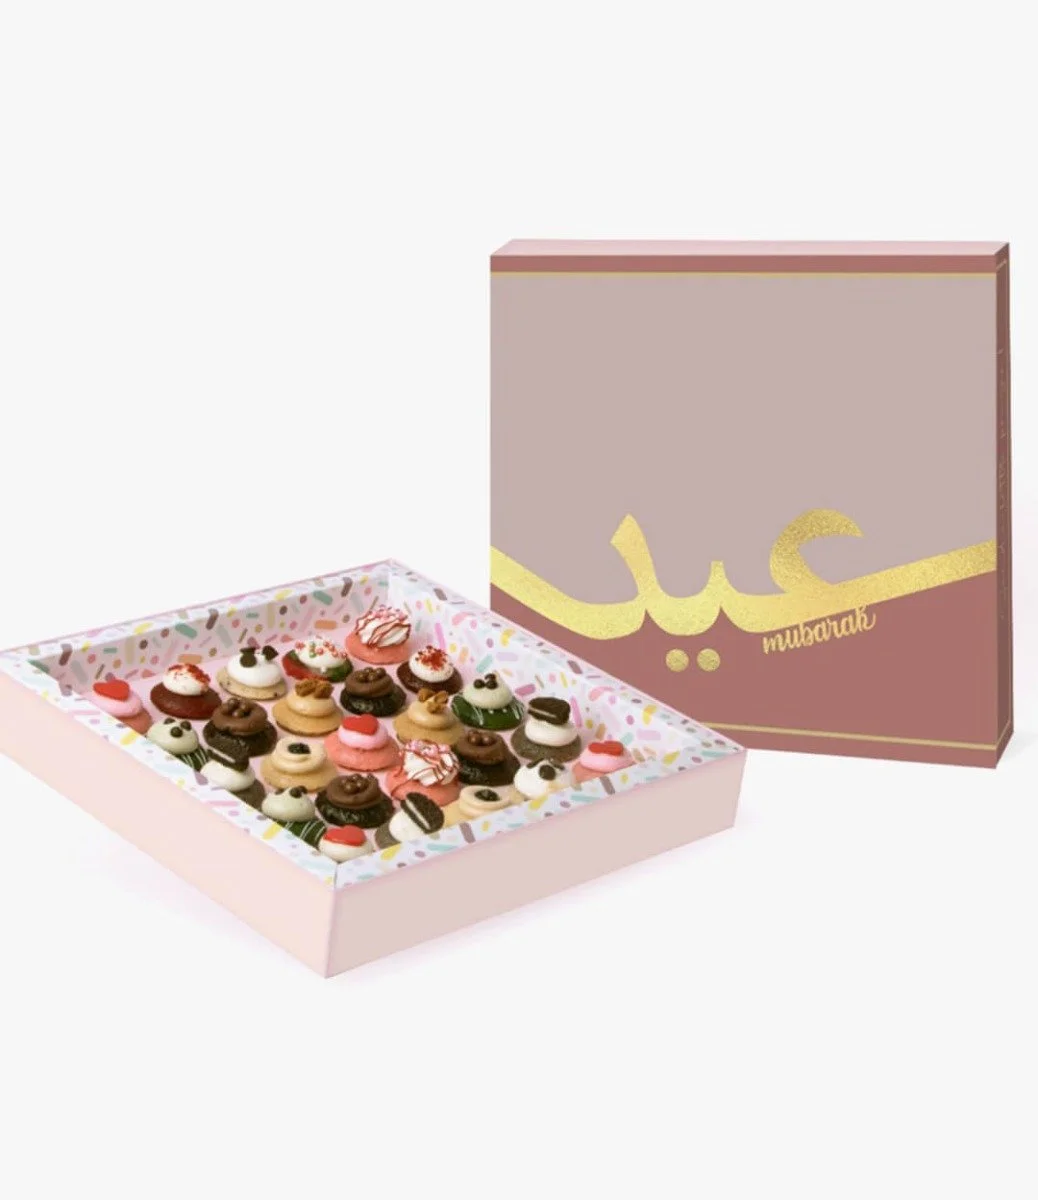 The One for Eid Box of 25 Cupcakes by Sugargram